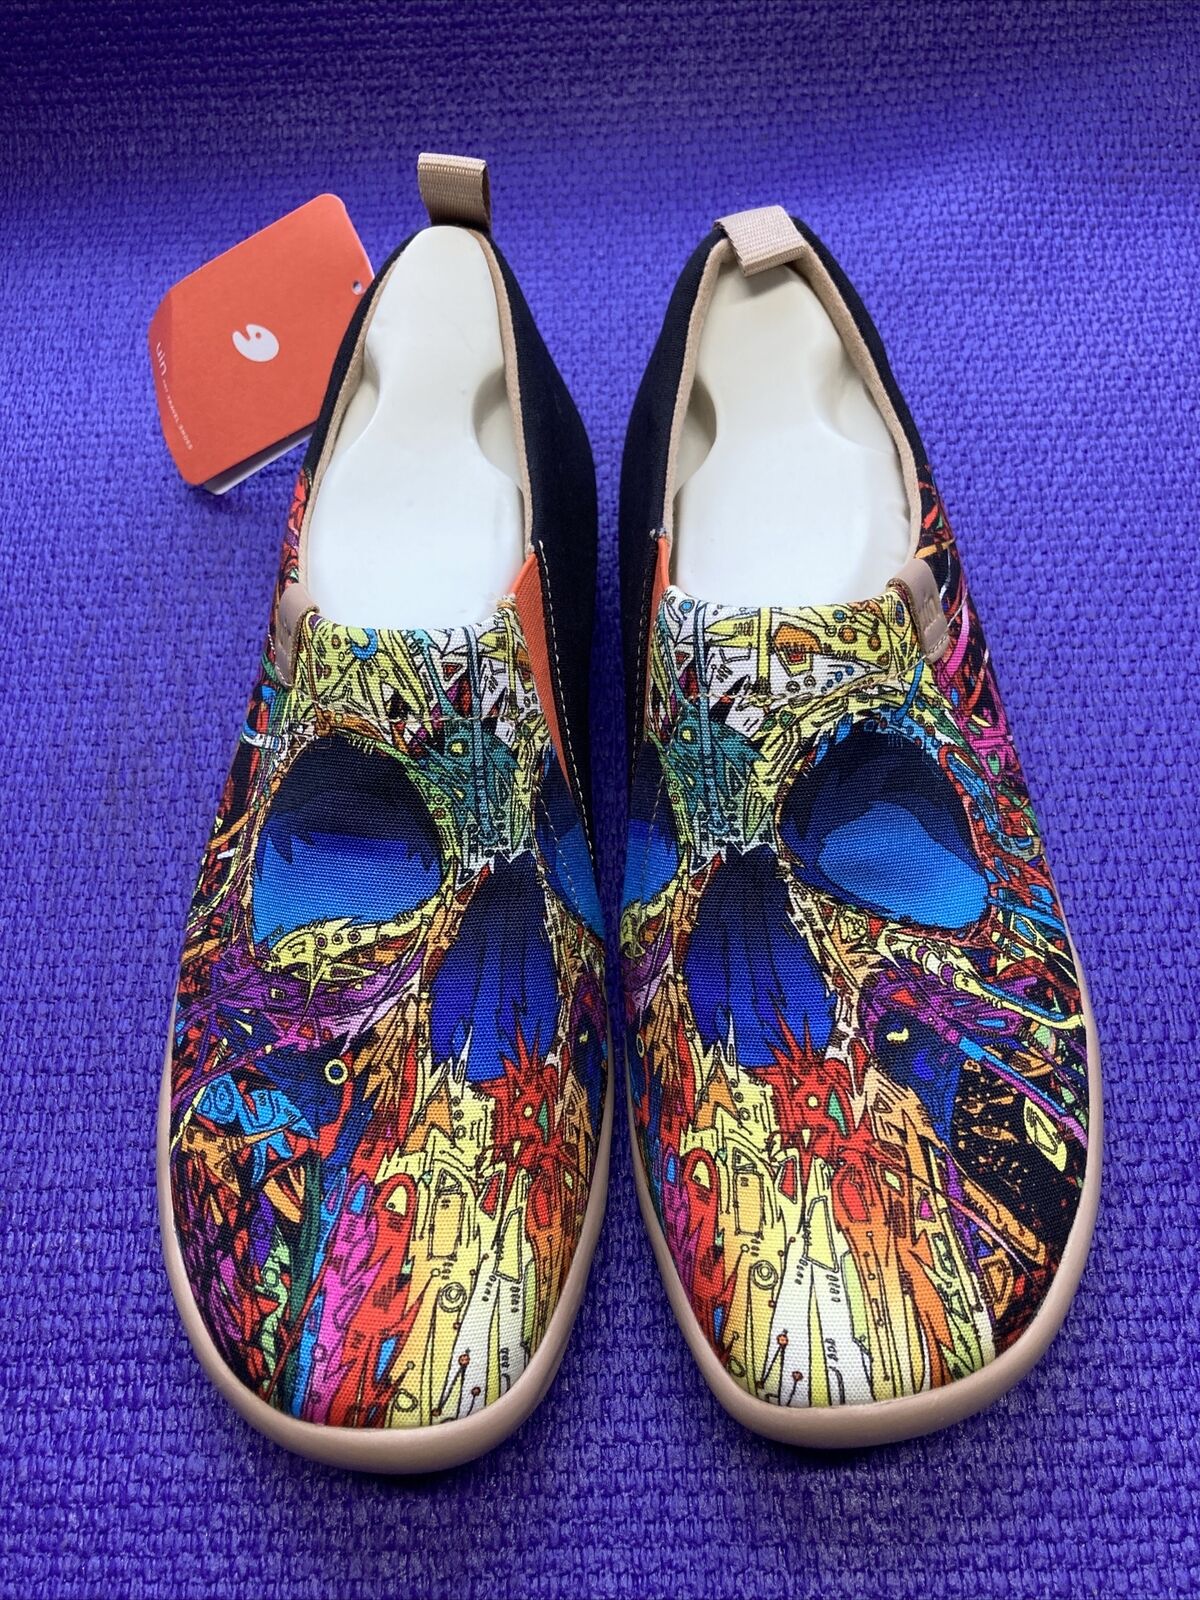 UIN ART TRAVEL NO BODY WOMENS TRAVEL SHOES CANVAS SLIP ON SIZE US 9